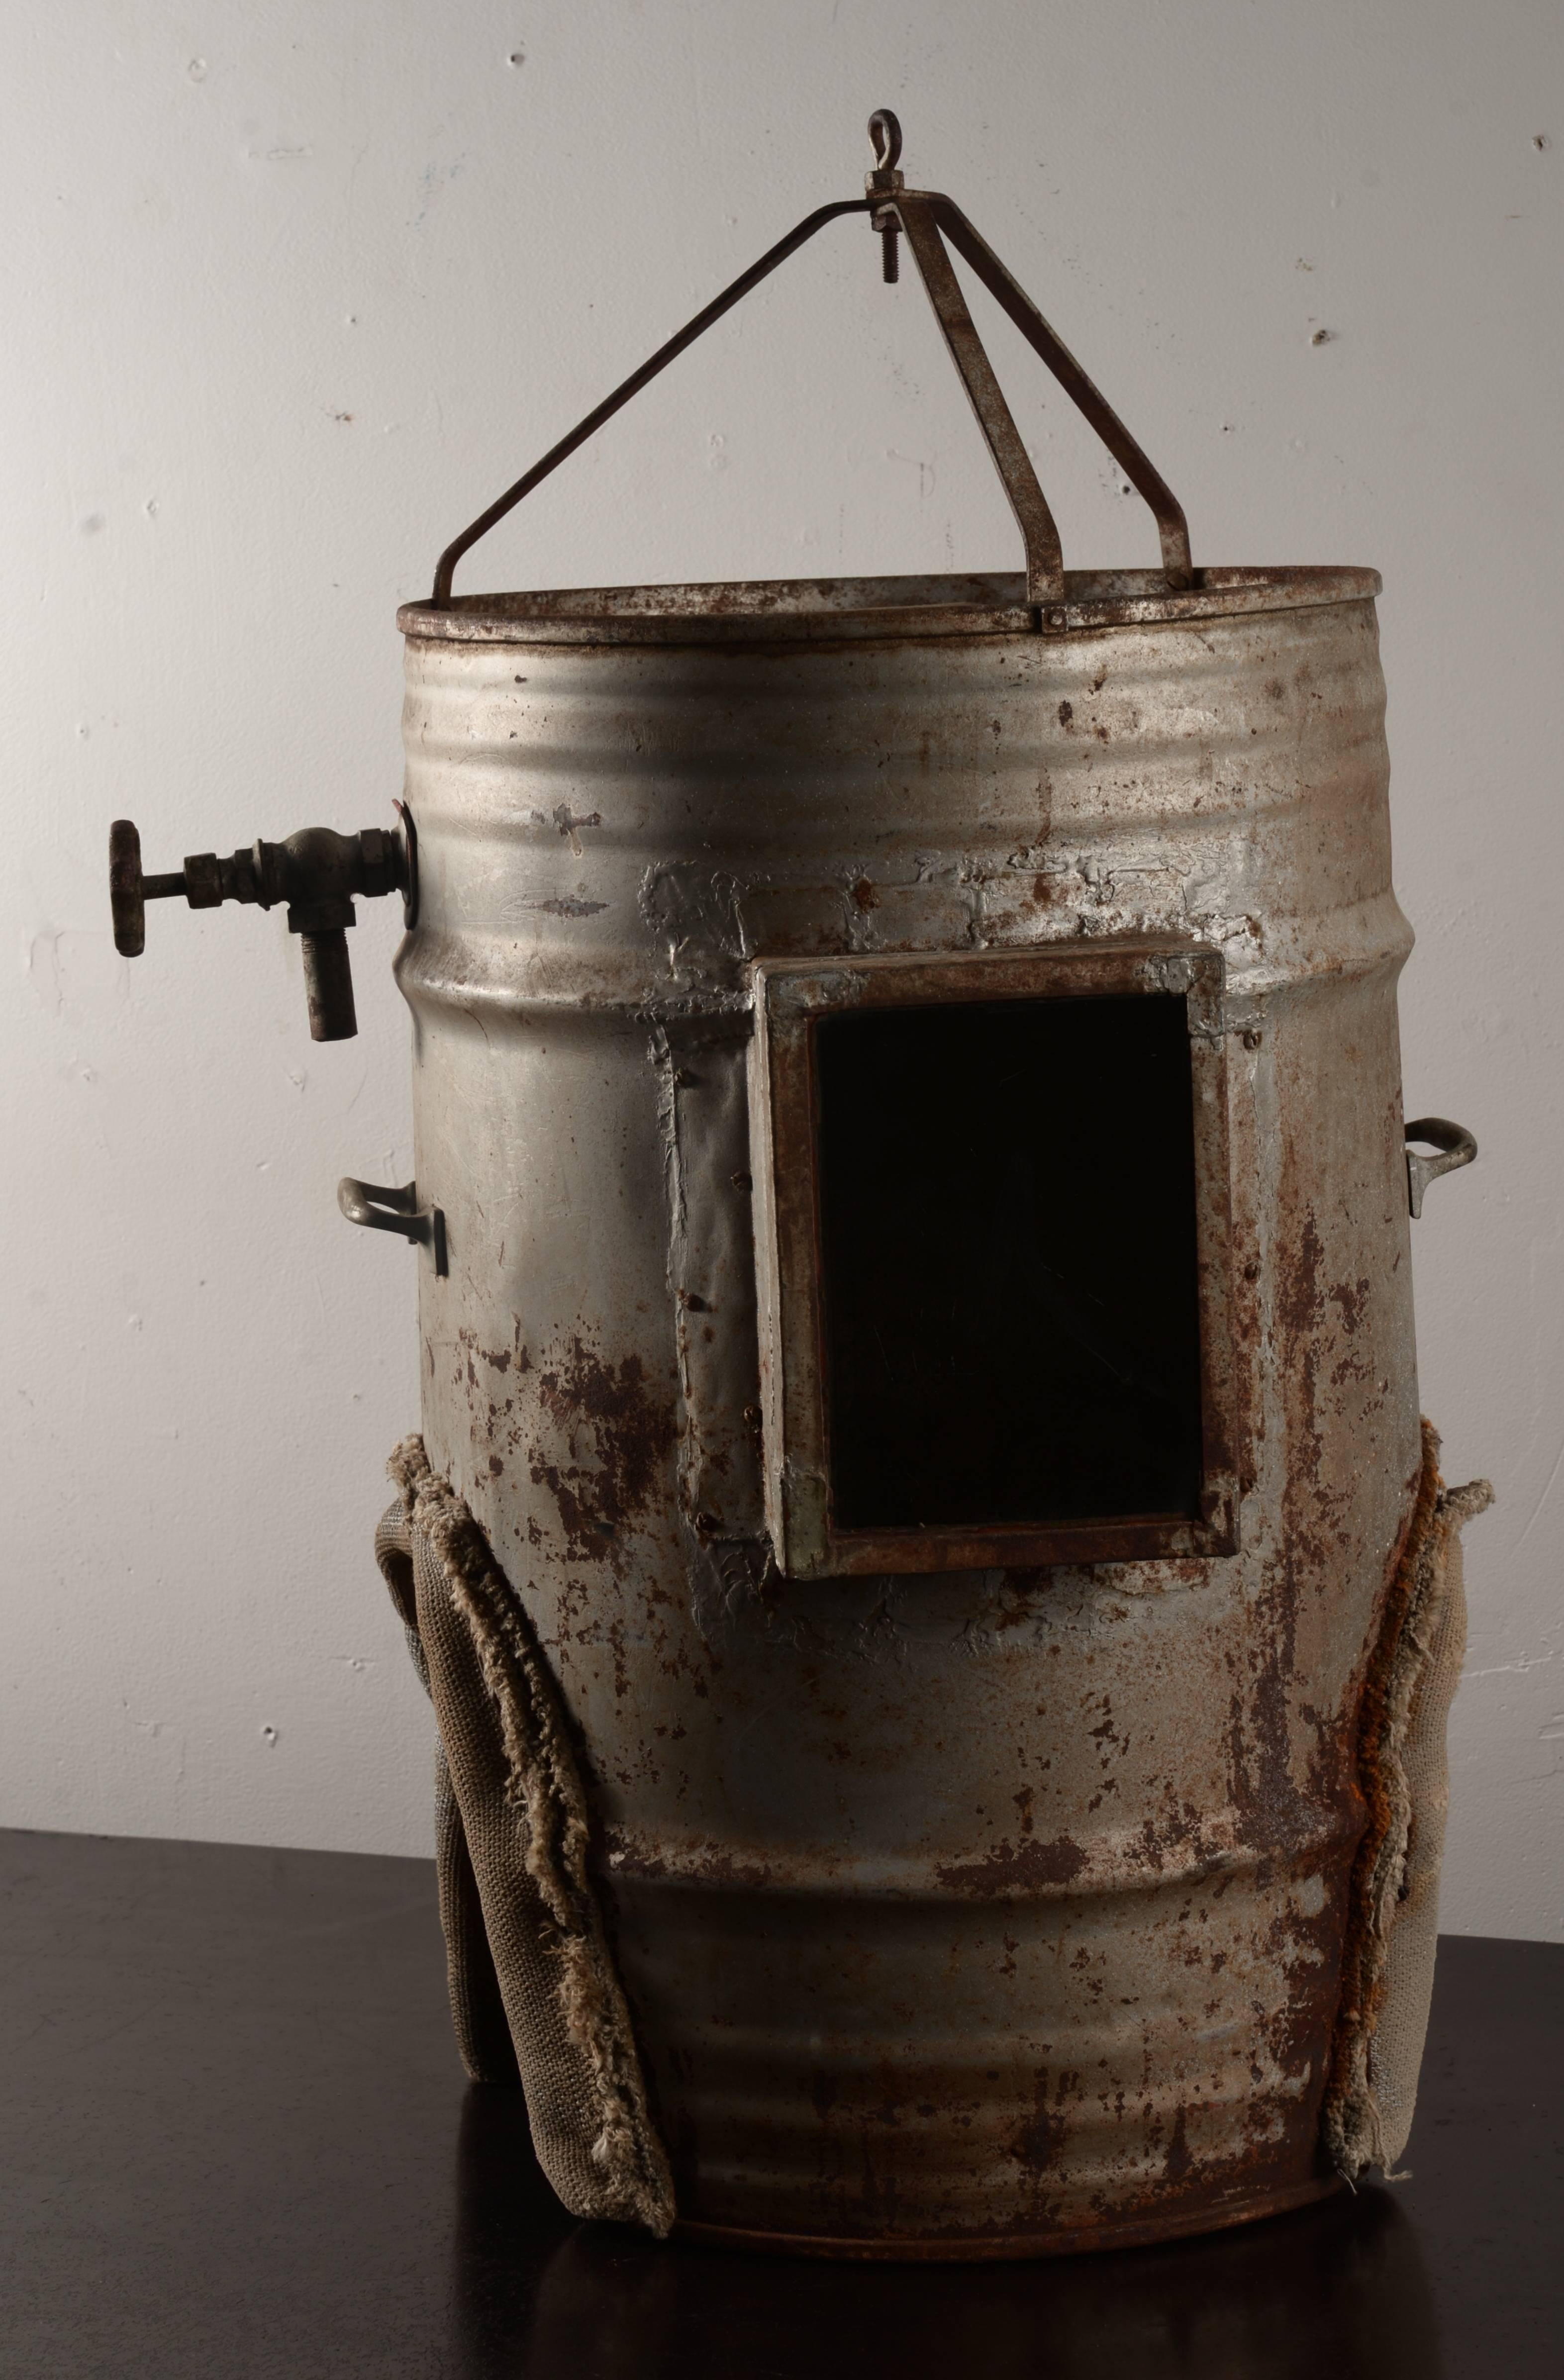 Handmade shallow diving helmet created out of a vintage galvanized drum with canvas padded shoulder cut-out.